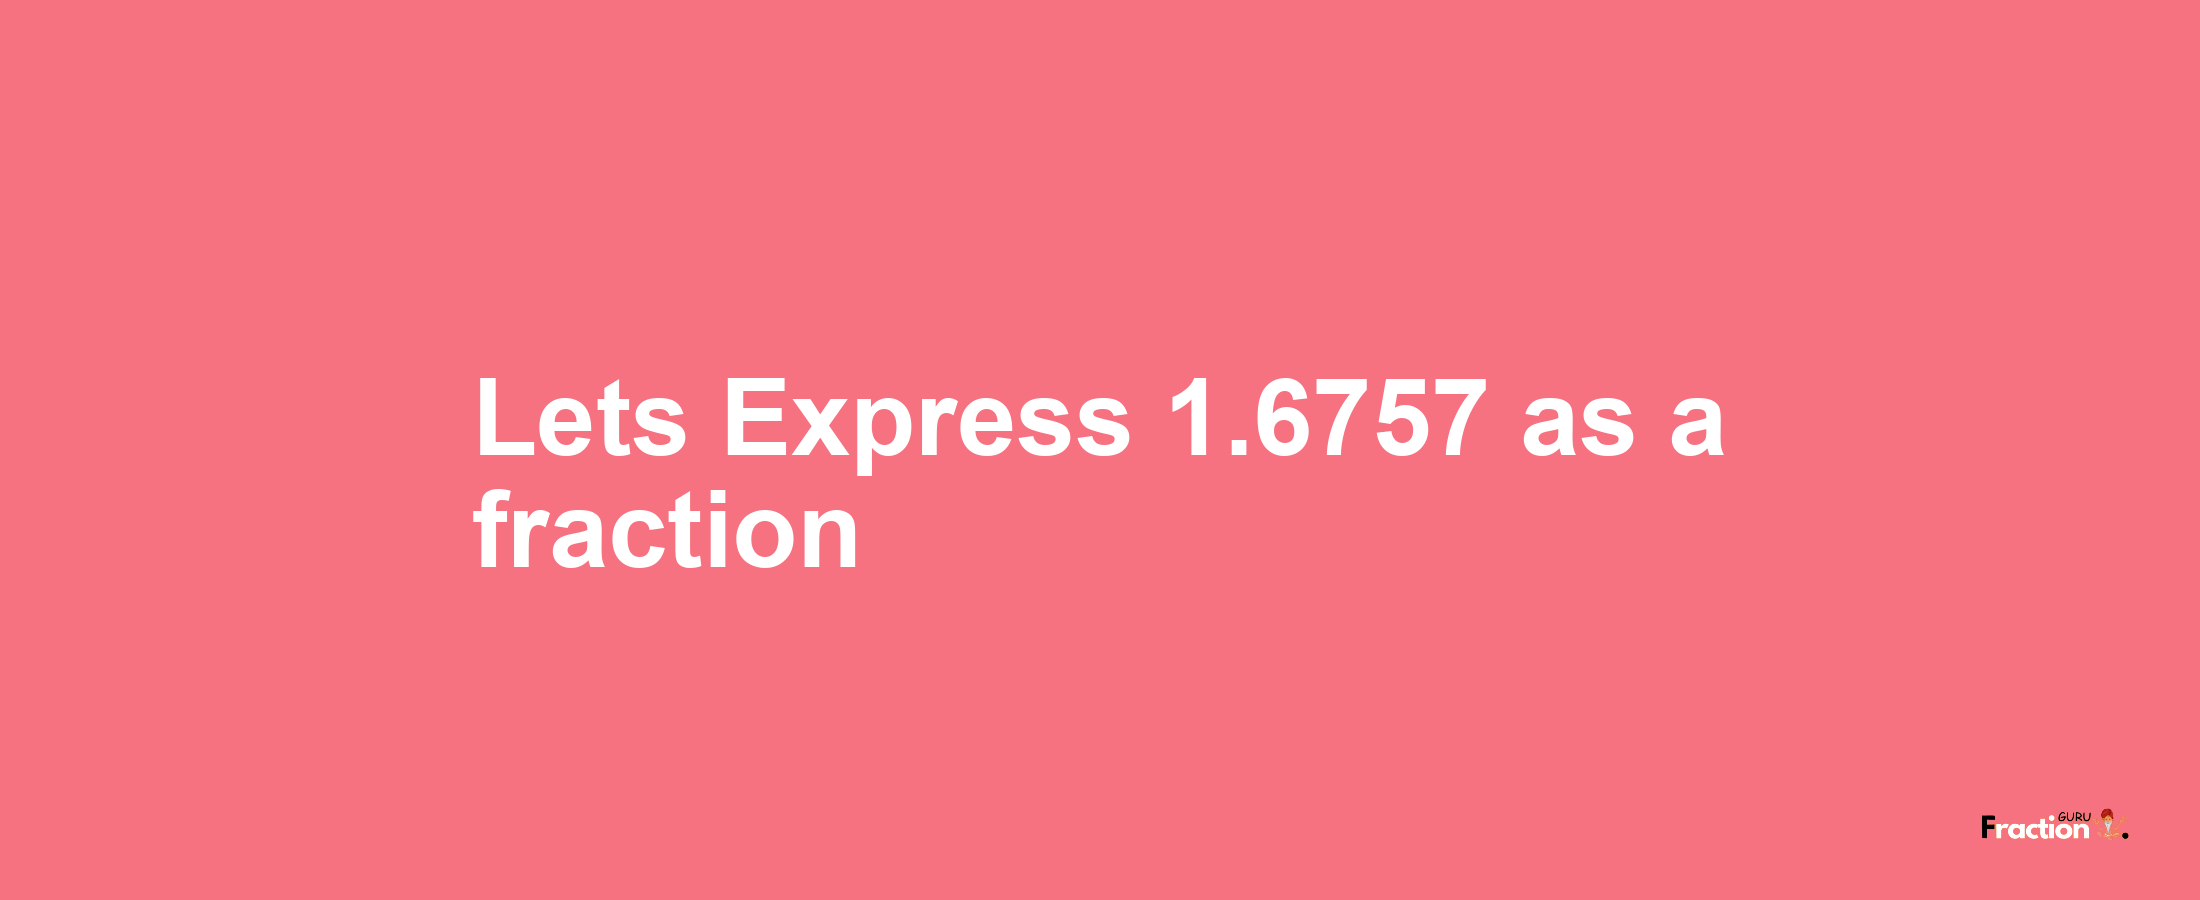 Lets Express 1.6757 as afraction